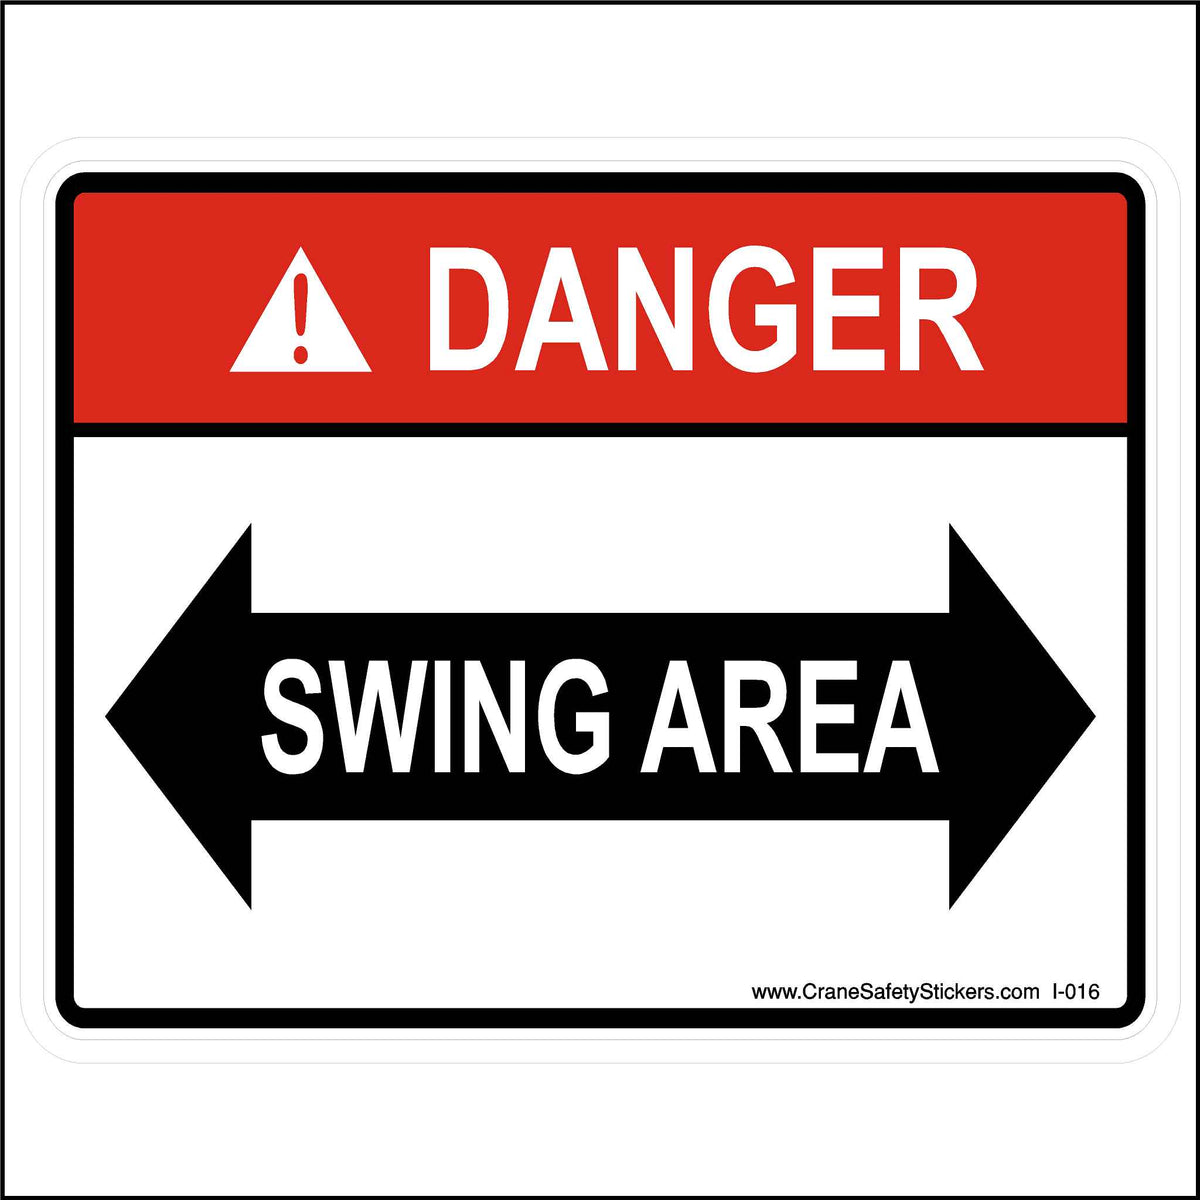 Safety Decal Printed With, DANGER Swing Area, with Arrows.